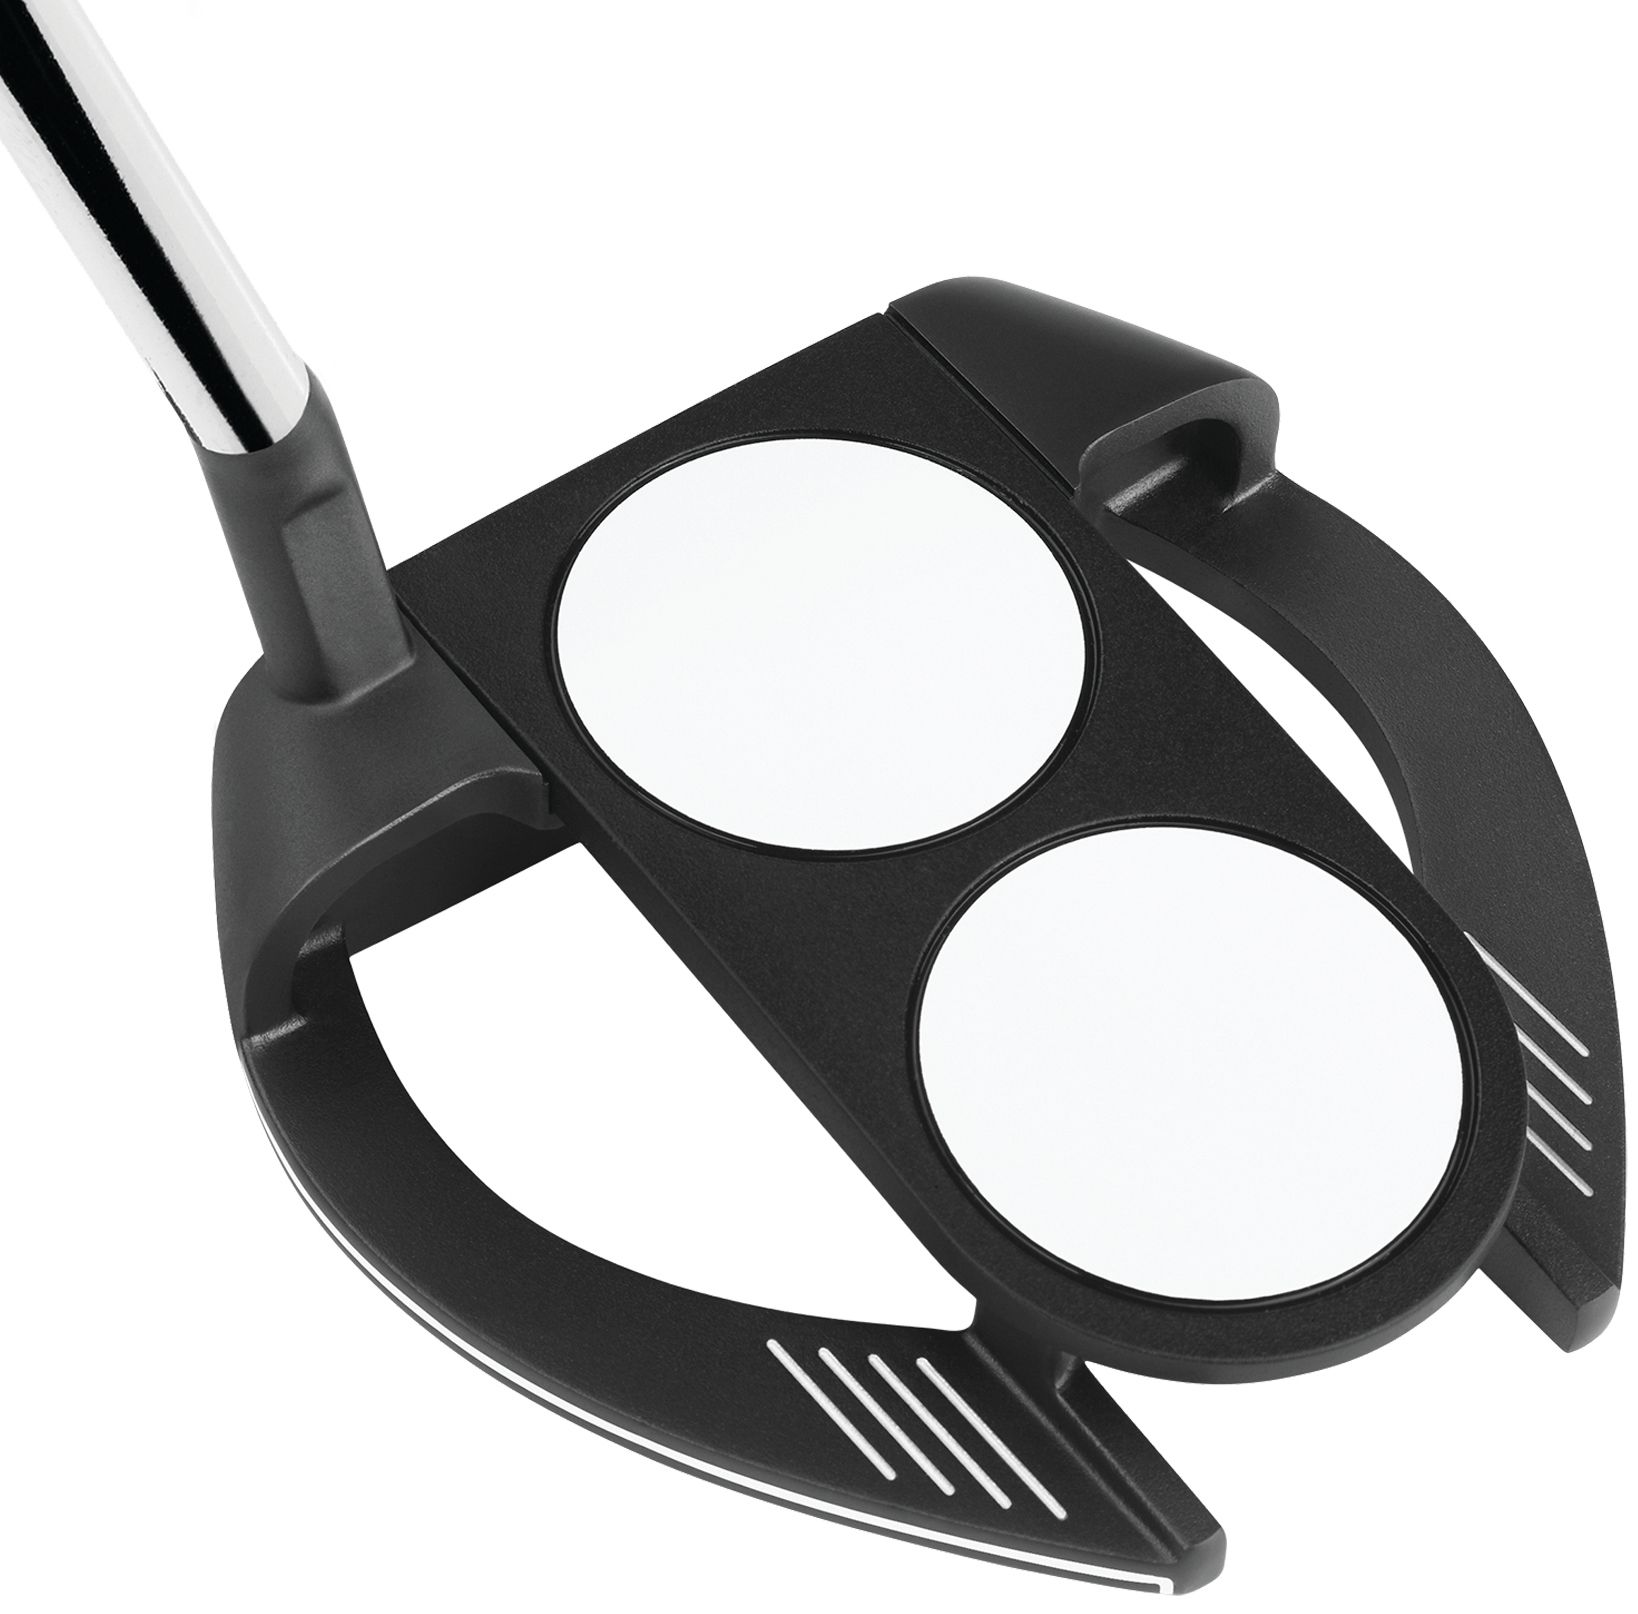 Odyssey O-Works Black 2-Ball Fang S Golf Putter, 35 Inch - image 1 of 1